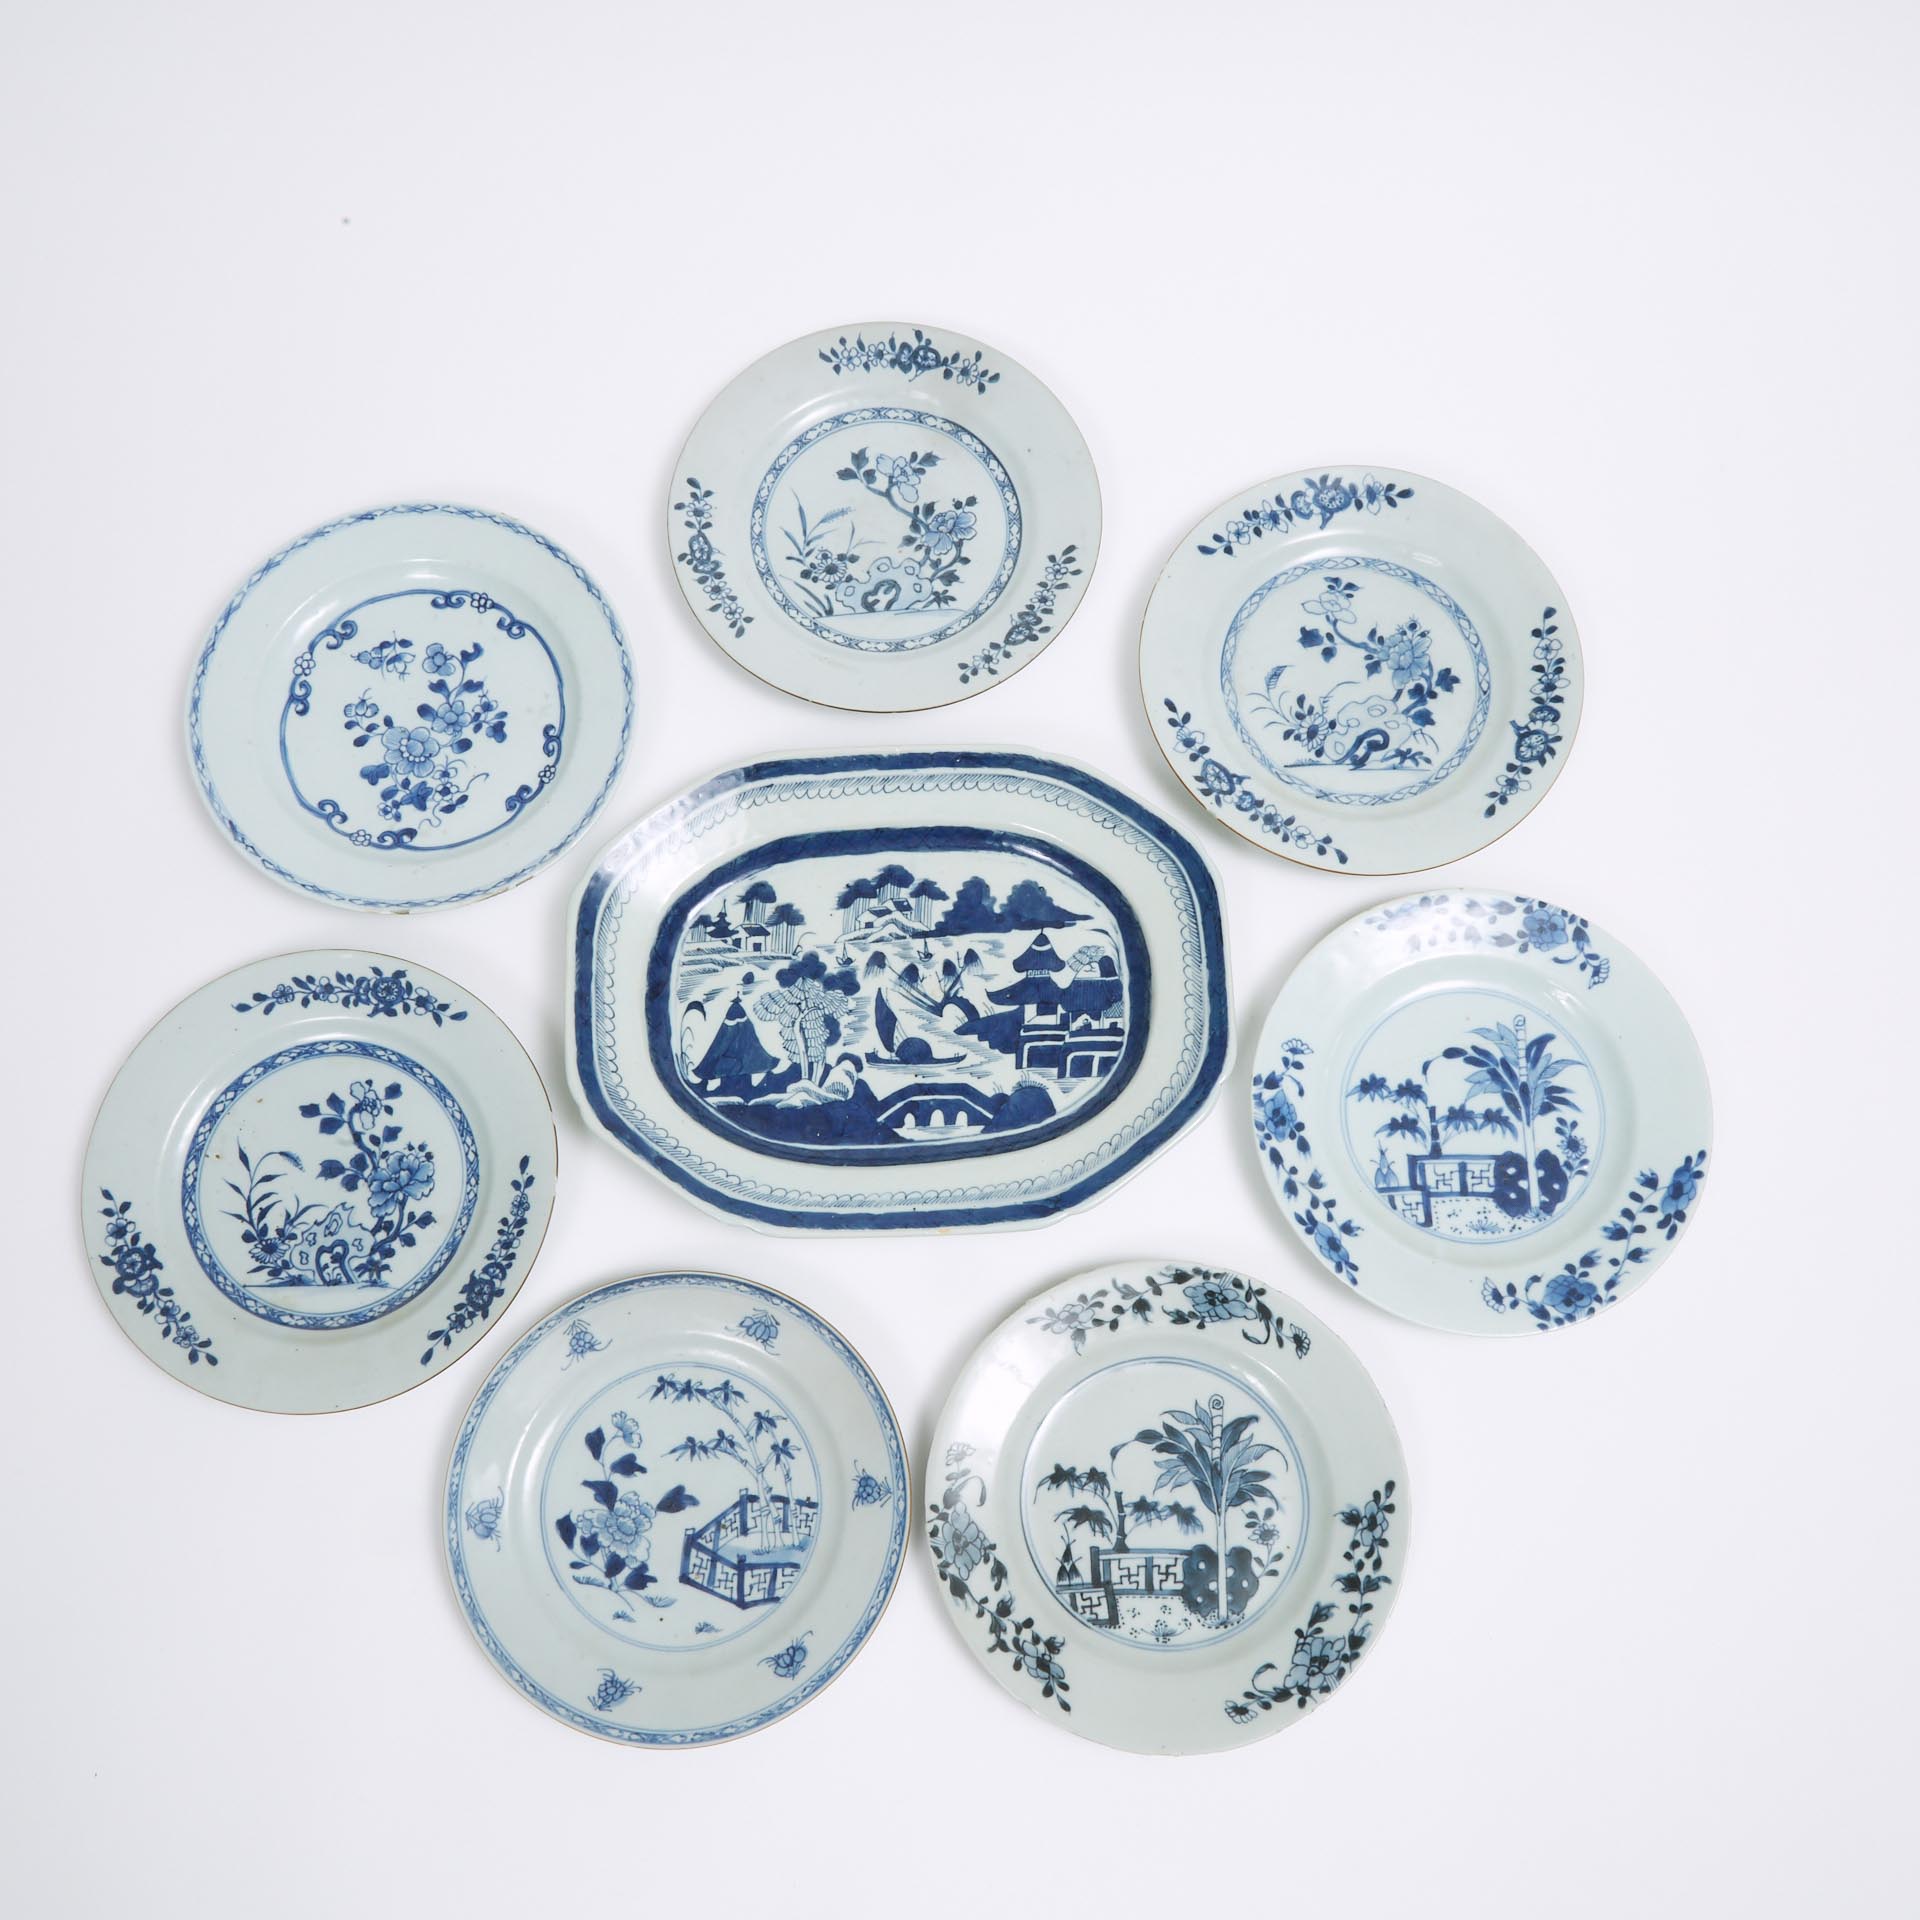 A Group of Eight Chinese Export Blue and White Plates, 18th/19th Century